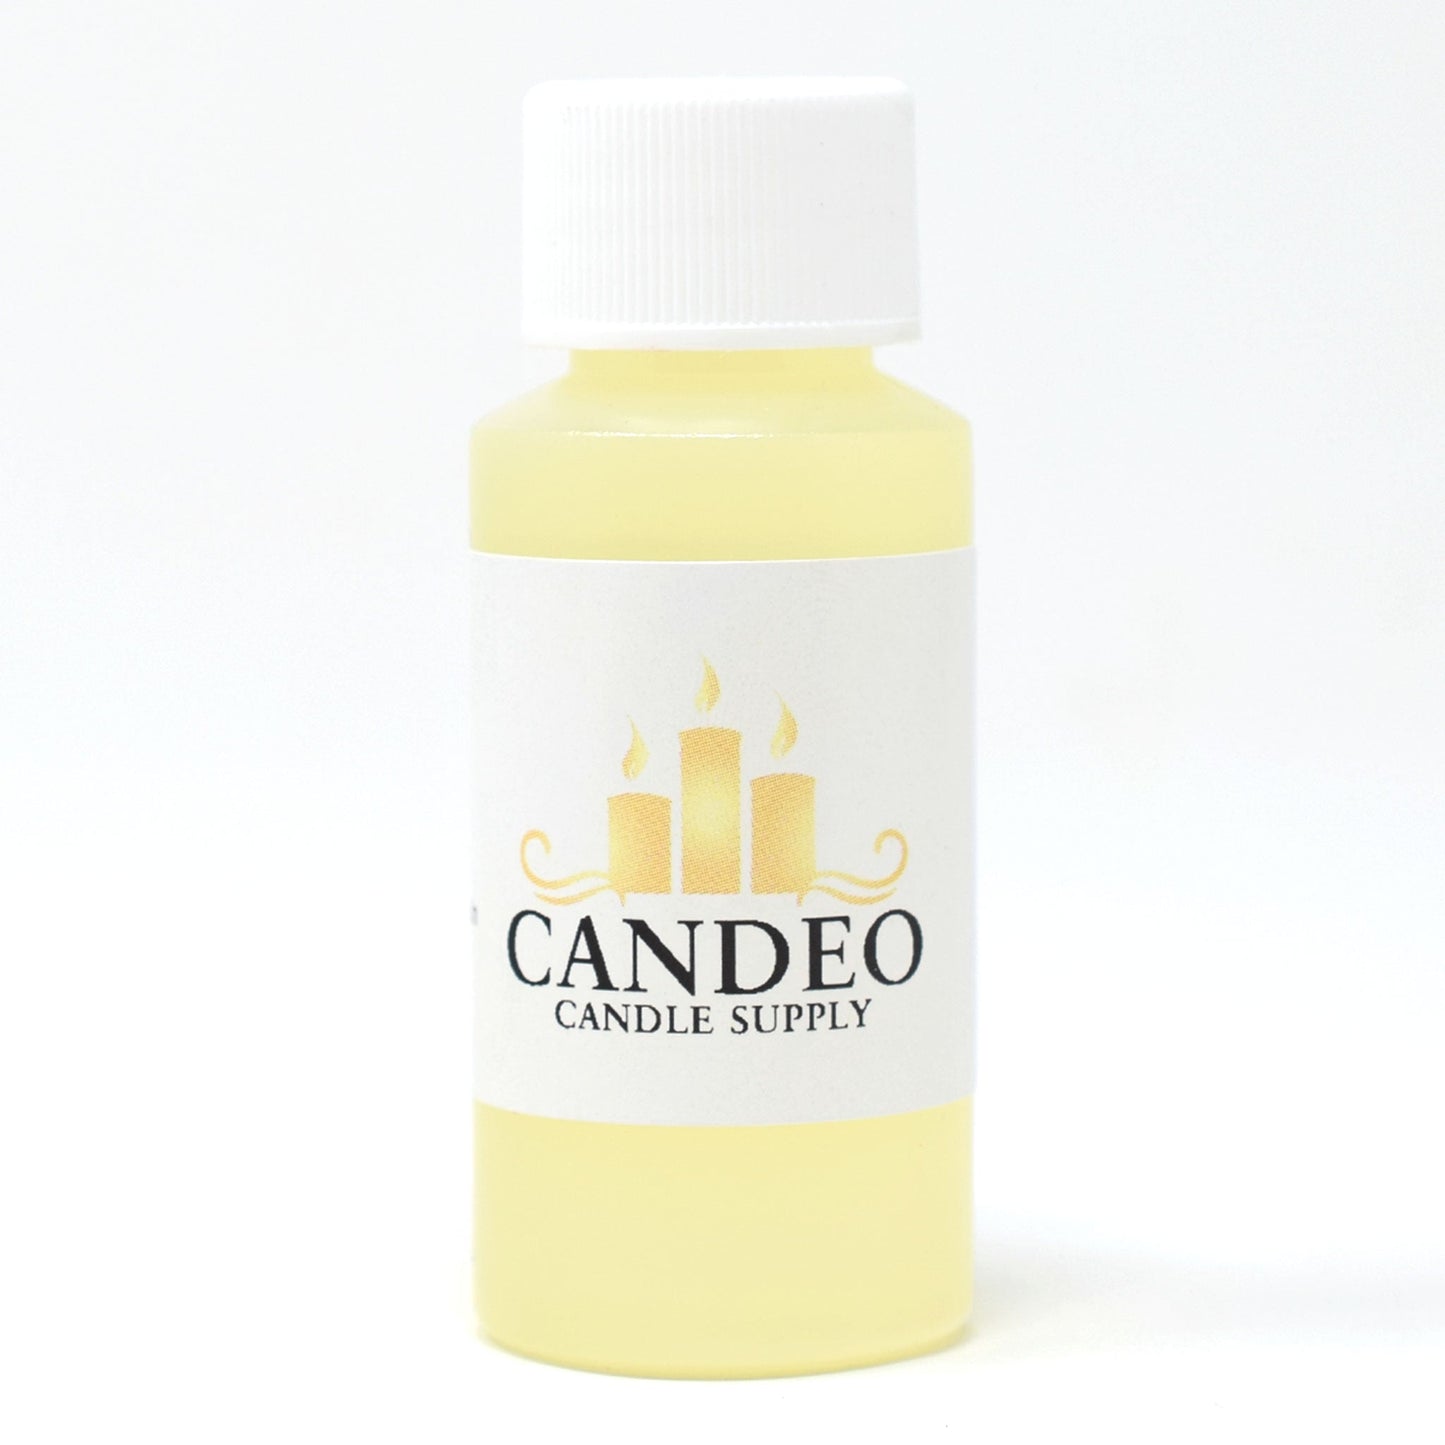 Maple Cinnamon Pumpkin Fragrance Oil - Candeo Candle Supply